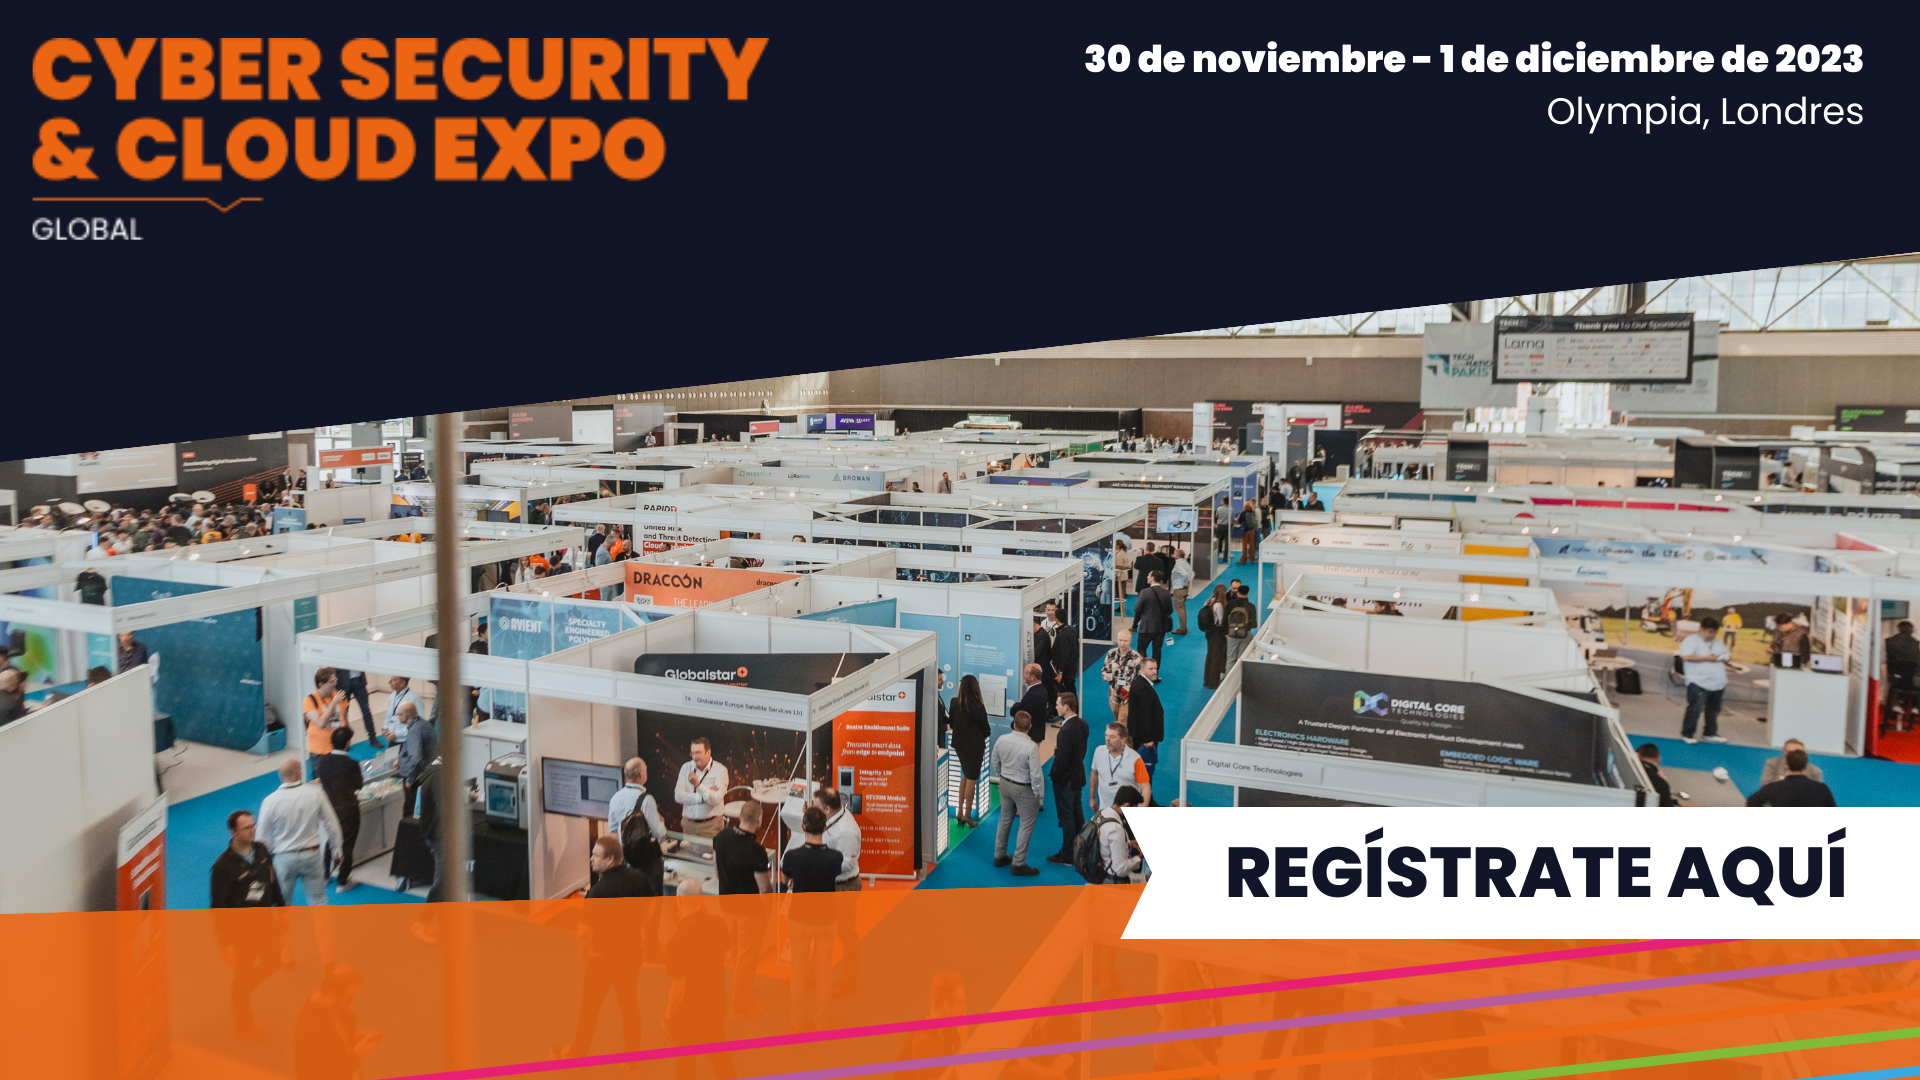 Cyber Security & Cloud Expo Global